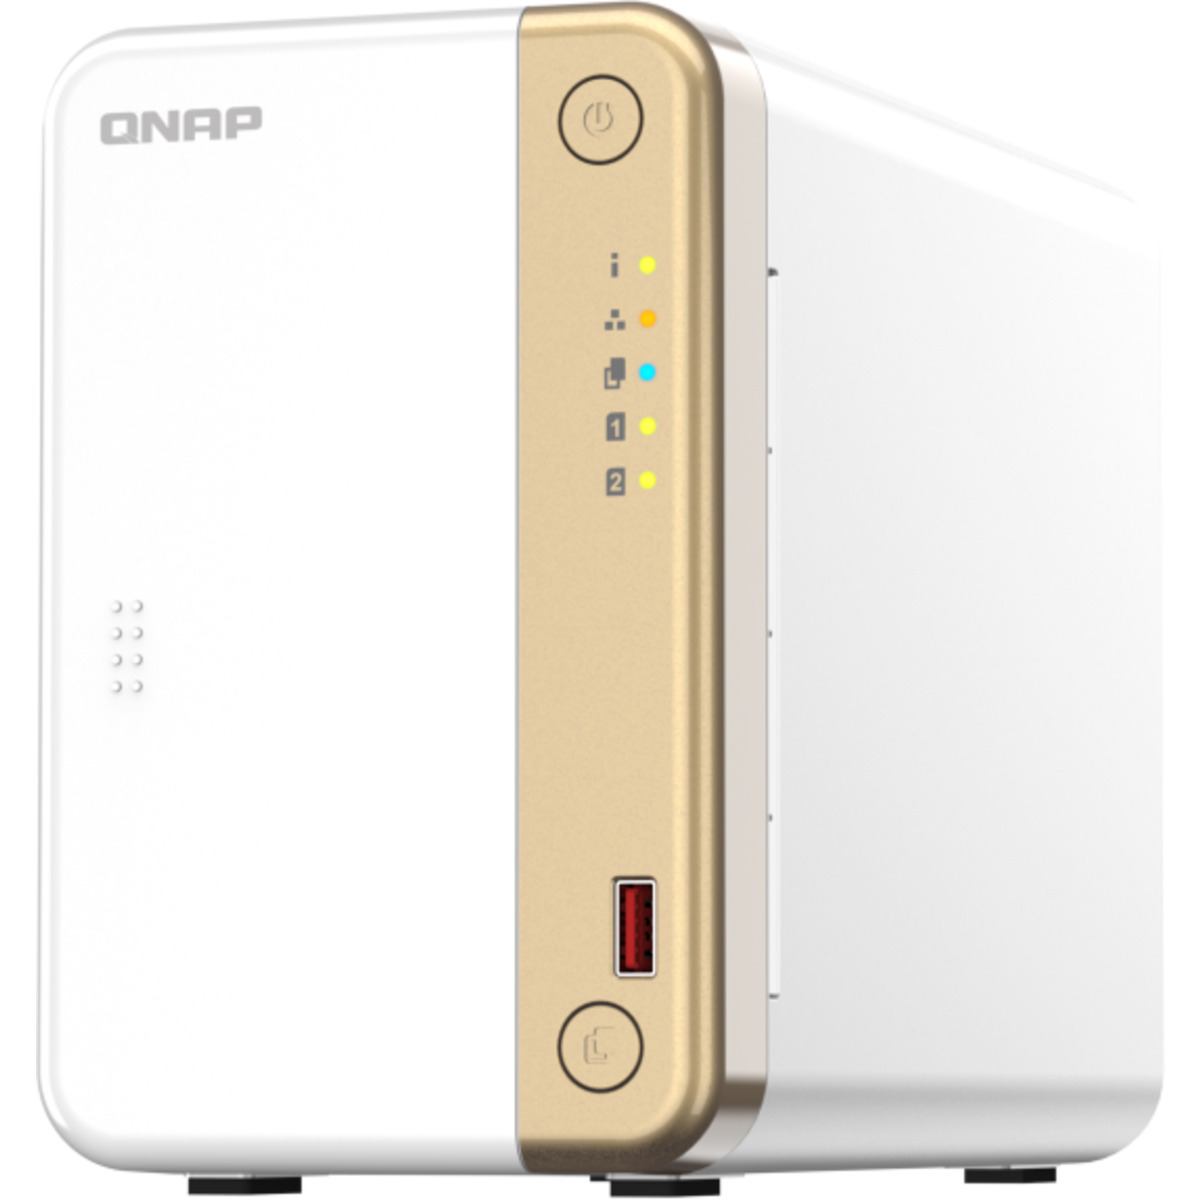 QNAP TS-262 12tb 2-Bay Desktop Personal / Basic Home / Small Office NAS - Network Attached Storage Device 1x12tb Western Digital Red Plus WD120EFBX 3.5 7200rpm SATA 6Gb/s HDD NAS Class Drives Installed - Burn-In Tested TS-262